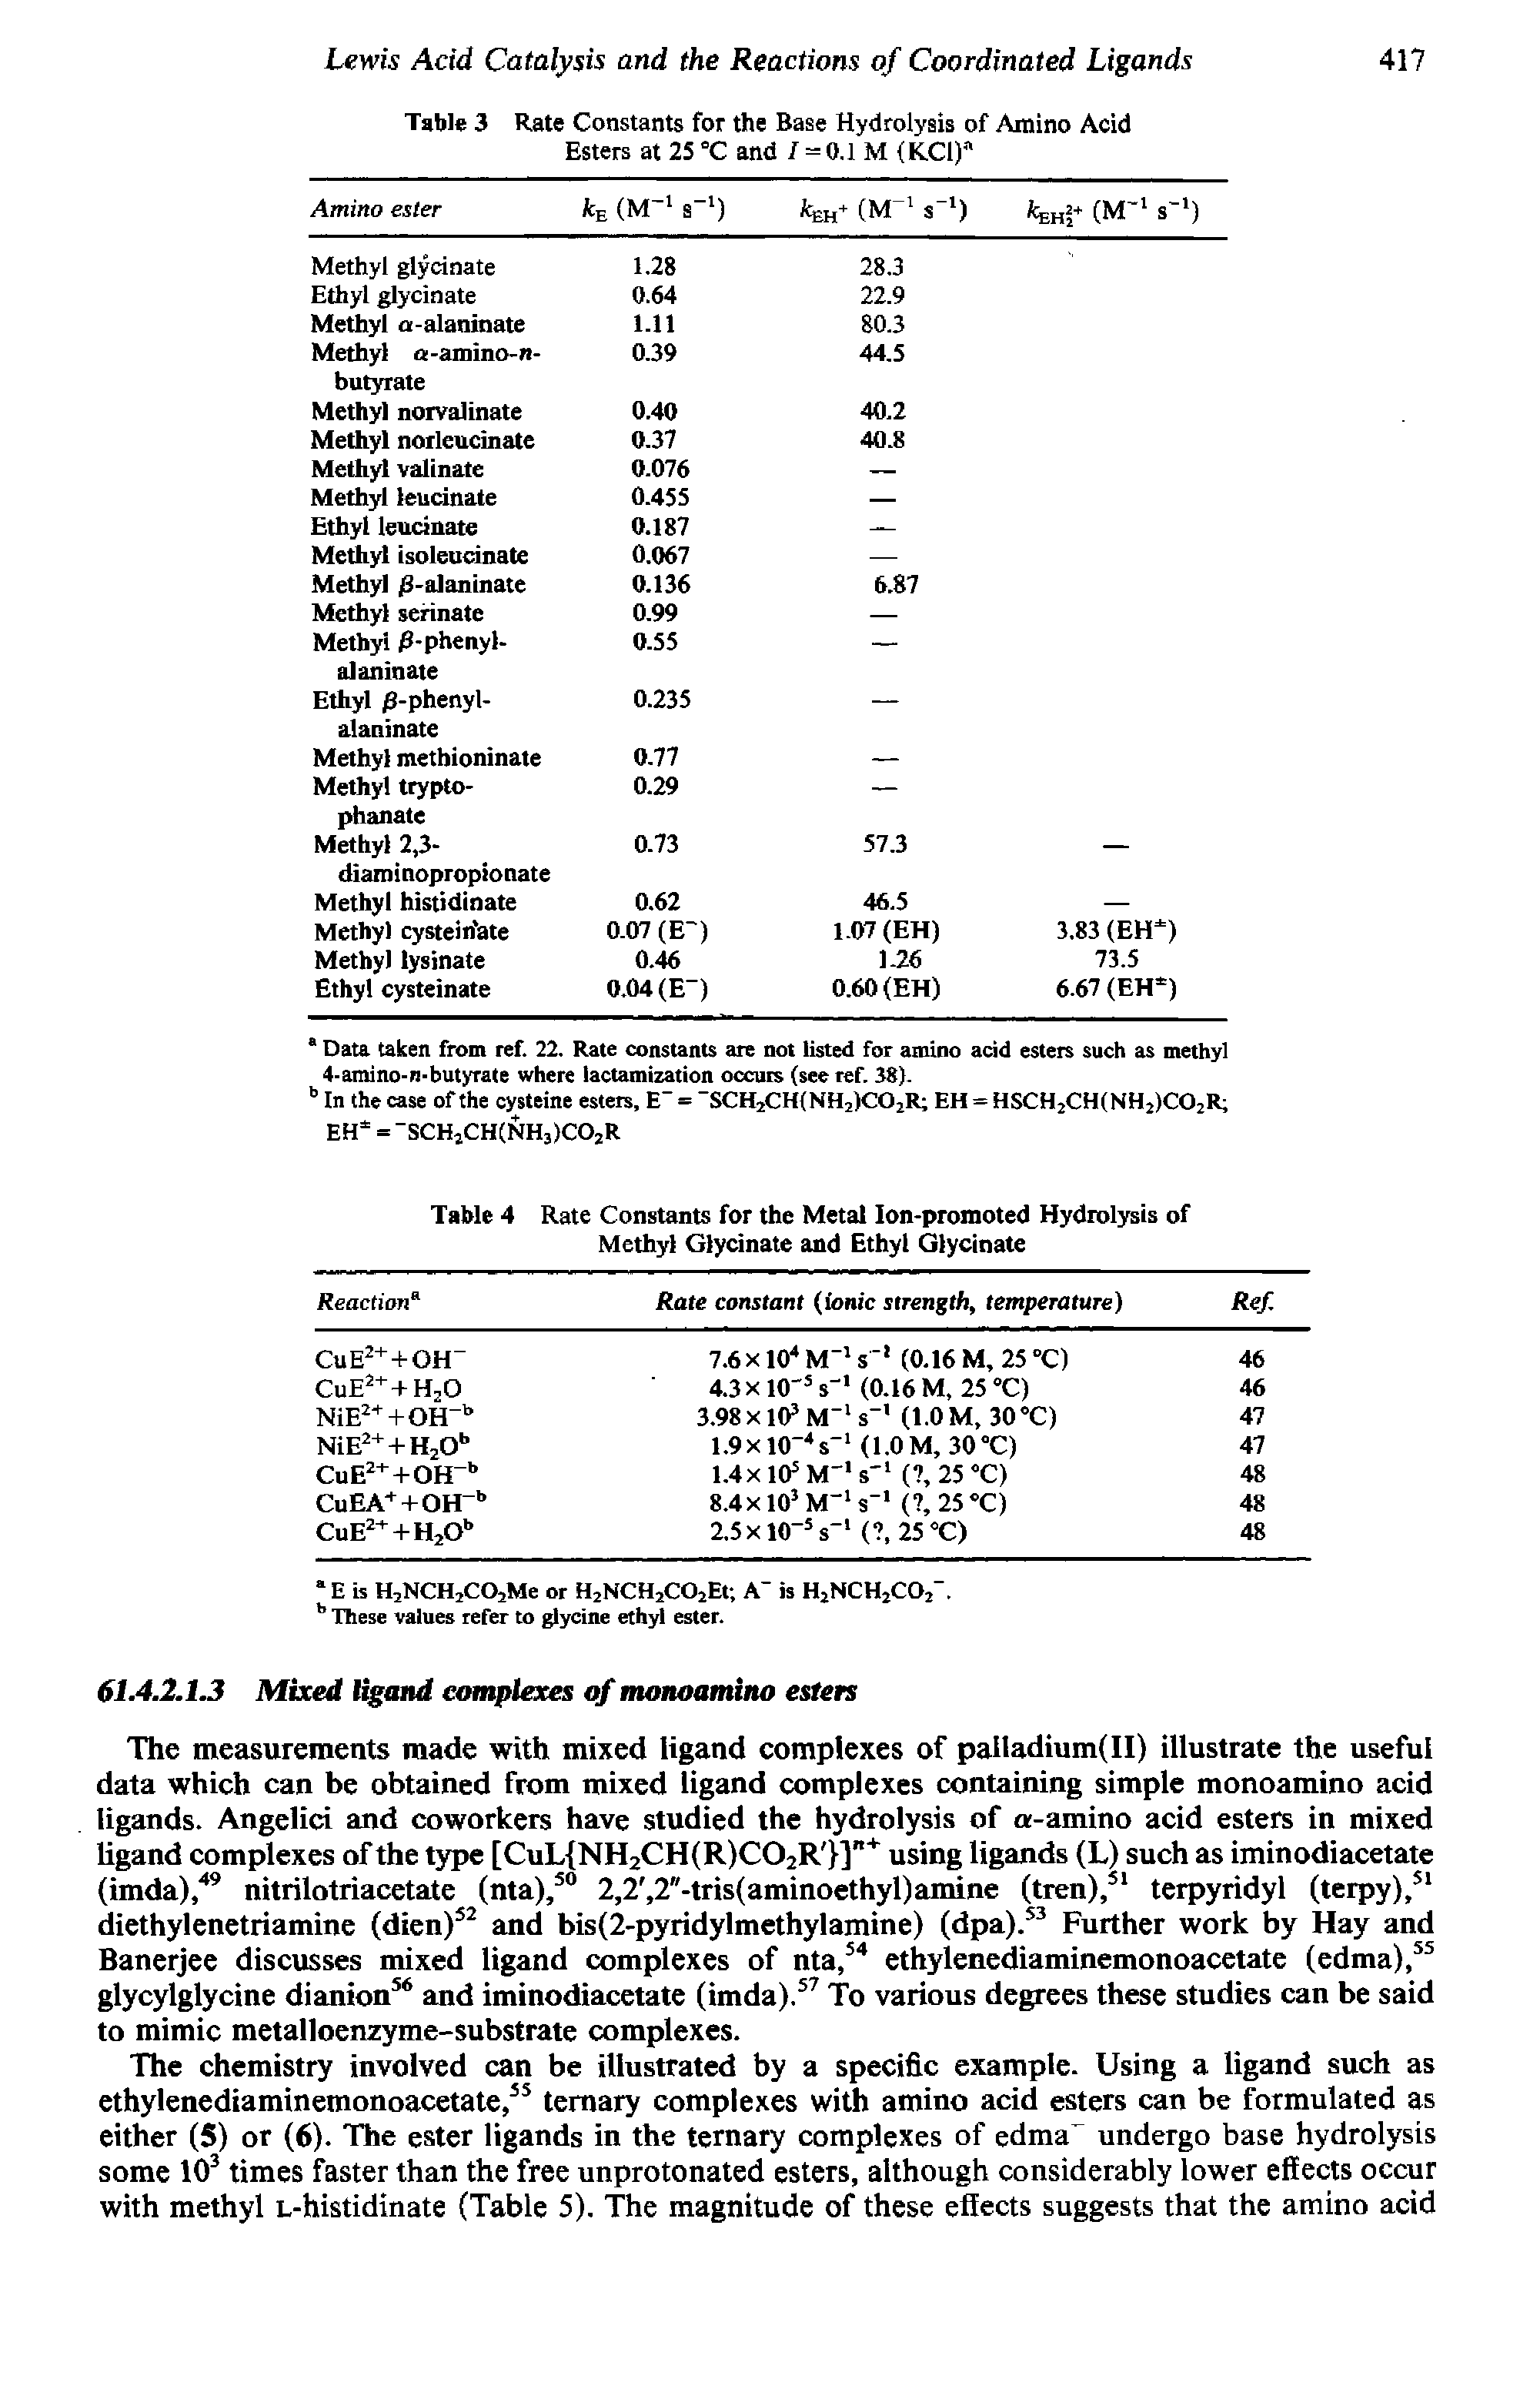 Table 4 Rate Constants for the Metal Ion-promoted Hydrolysis of Methyl Glycinate and Ethyl Glycinate...